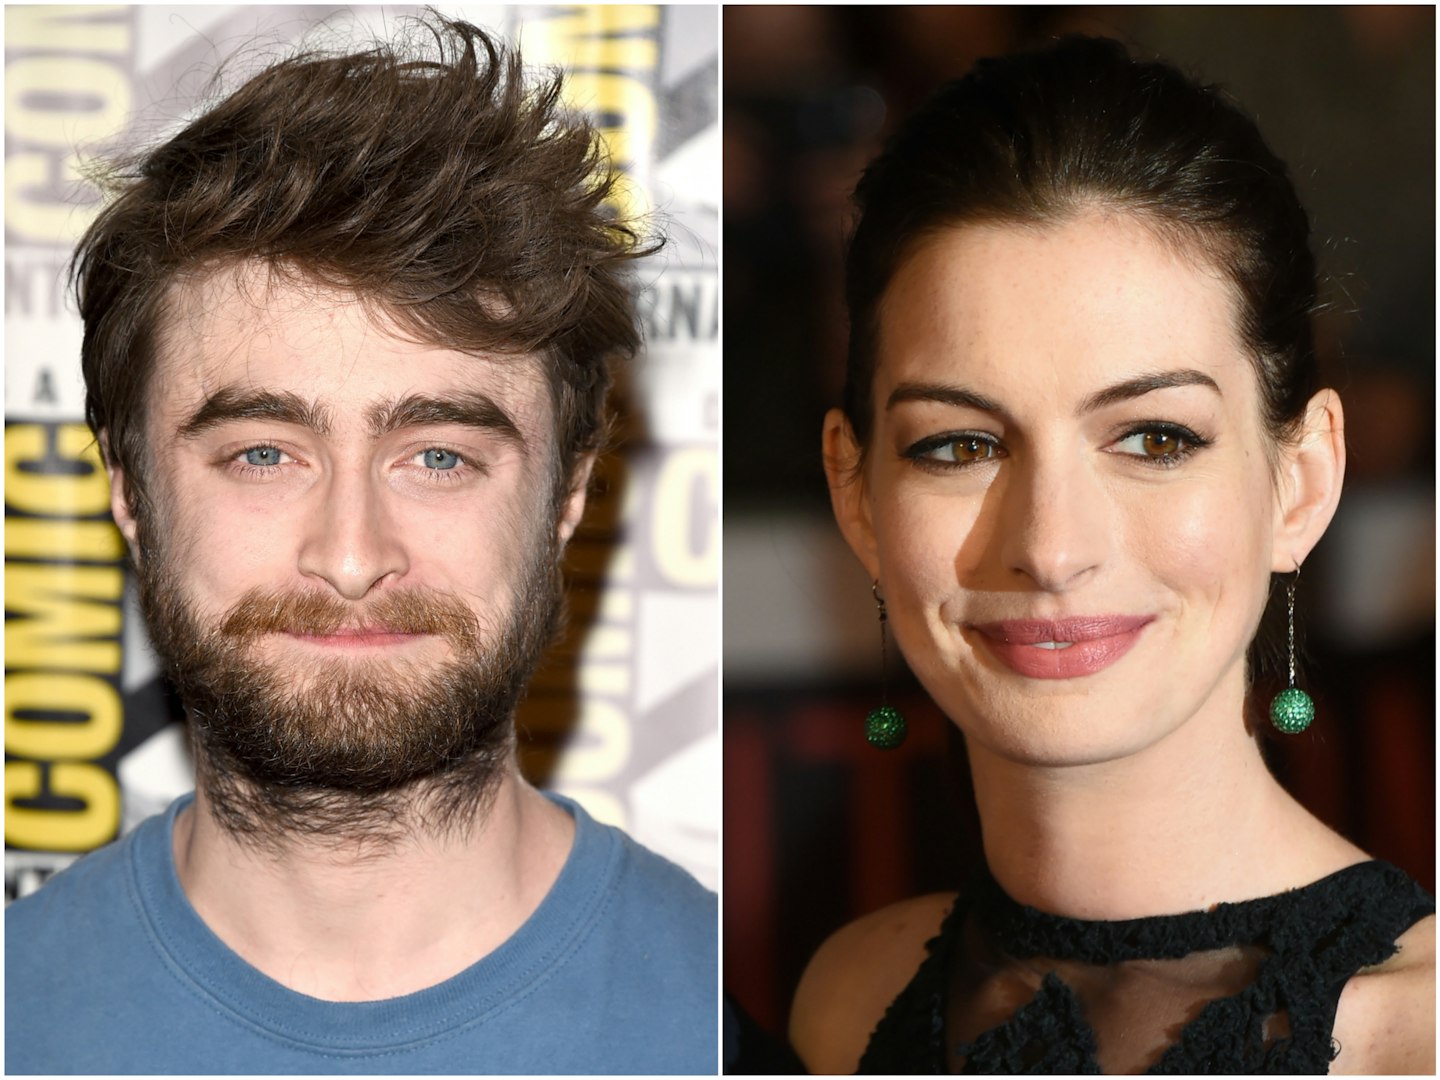 Daniel Radcliffe and Anne Hathaway